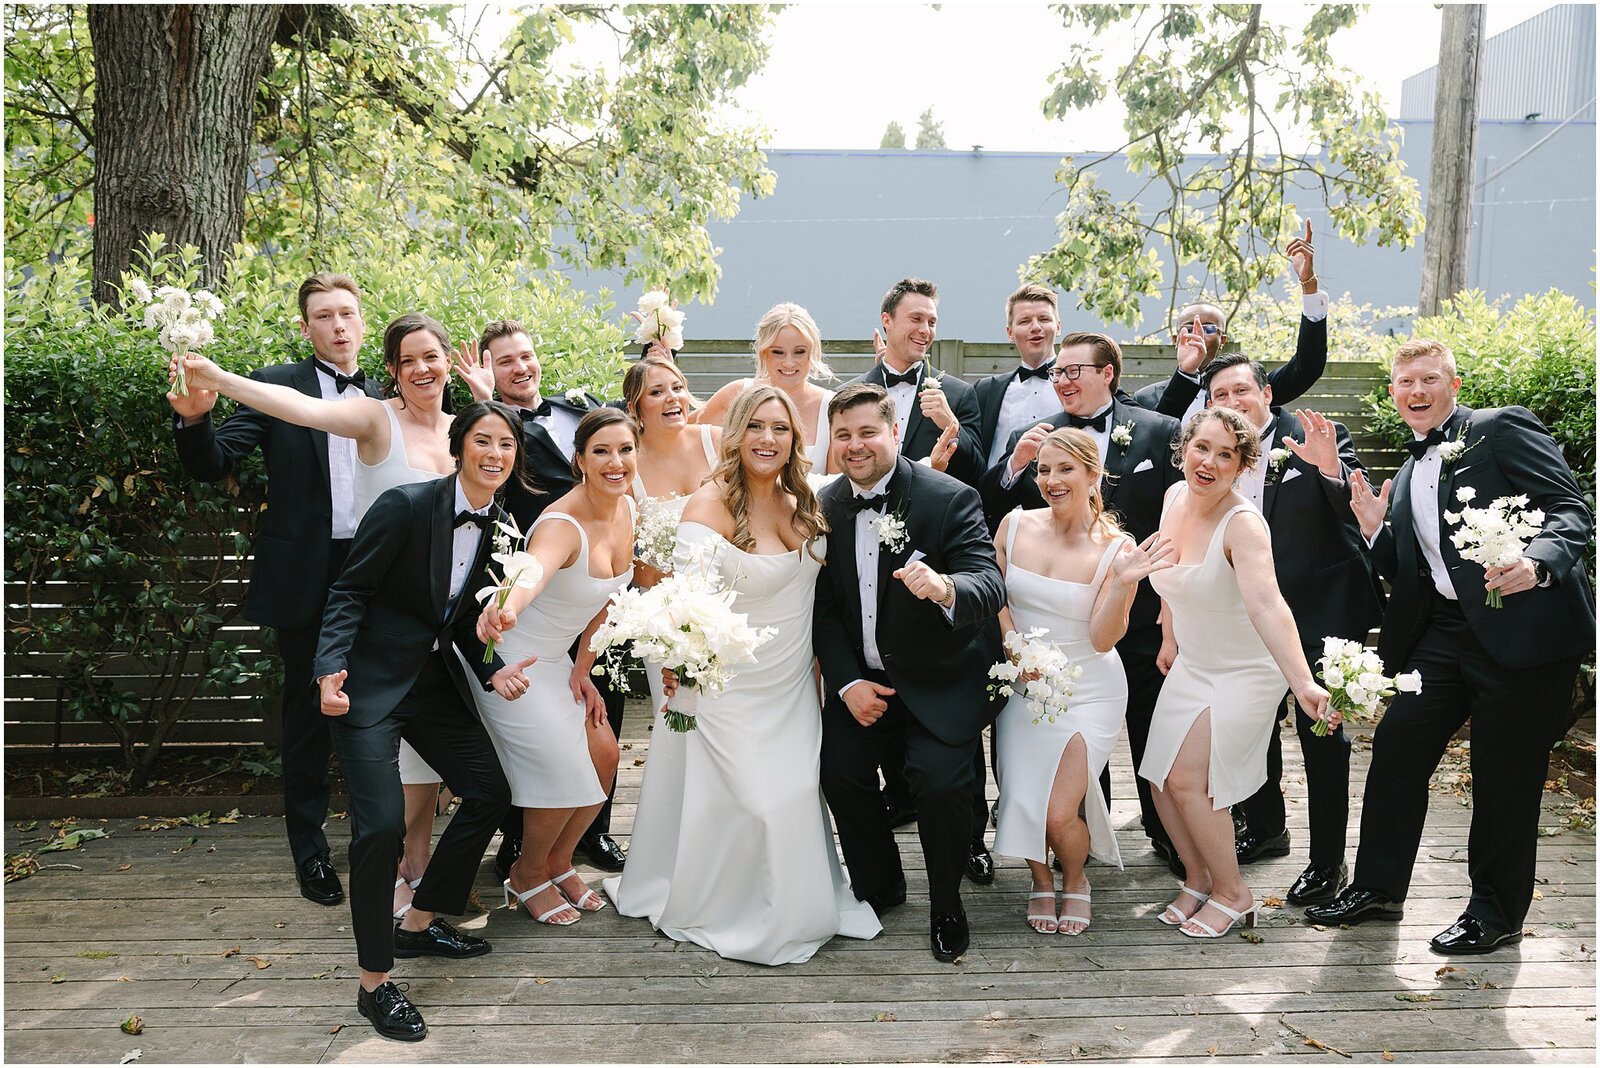 Bridal party posing holding white bouquets out